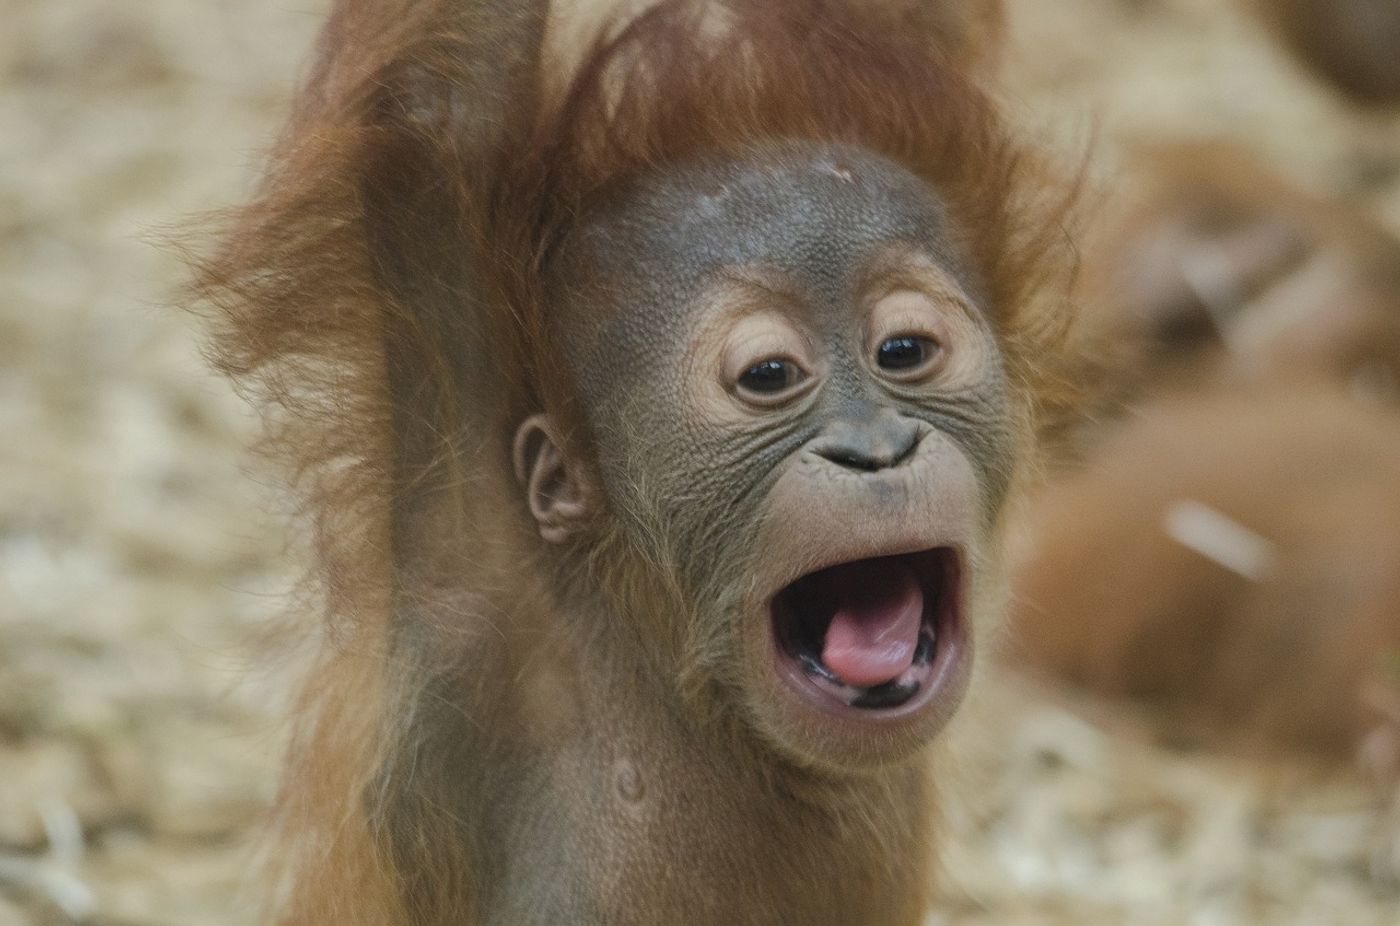 Baby orangutans breastfeed after birth and then slowly transition into a solid food iet before dropping breastfeeding altogether.